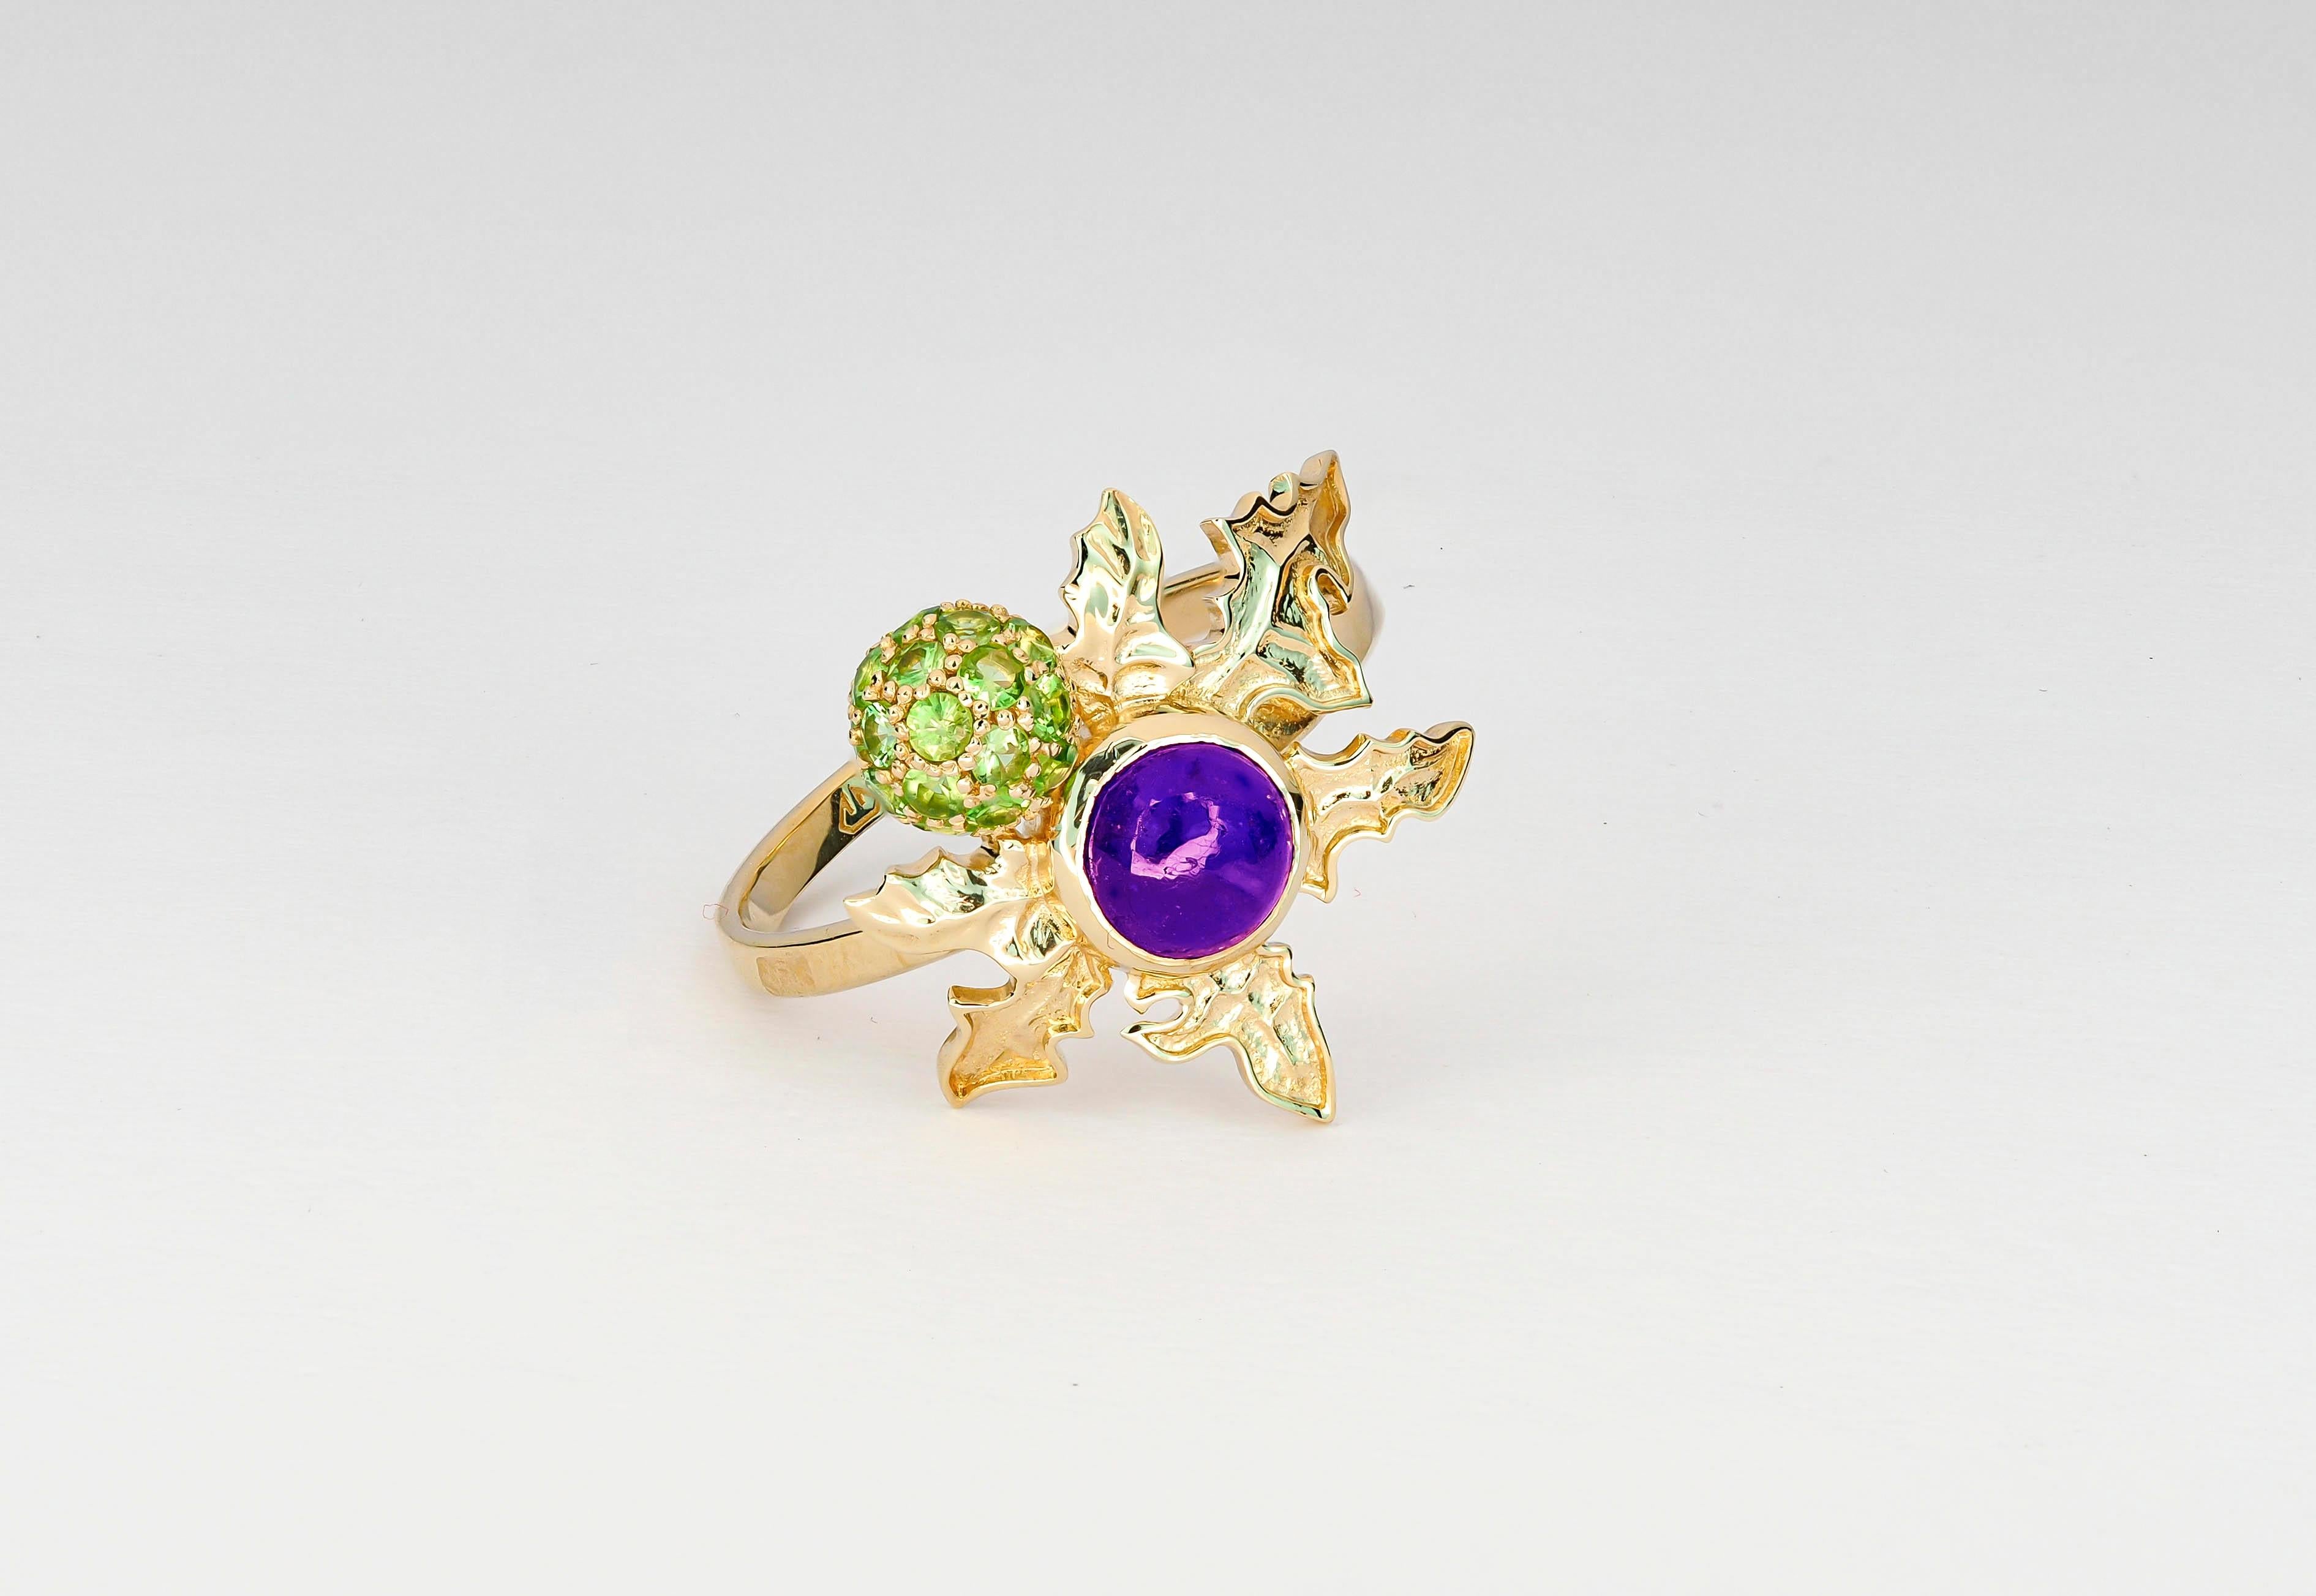 For Sale:  14 K Gold Scottish Thistle Ring with Amethyst and Peridots! 4